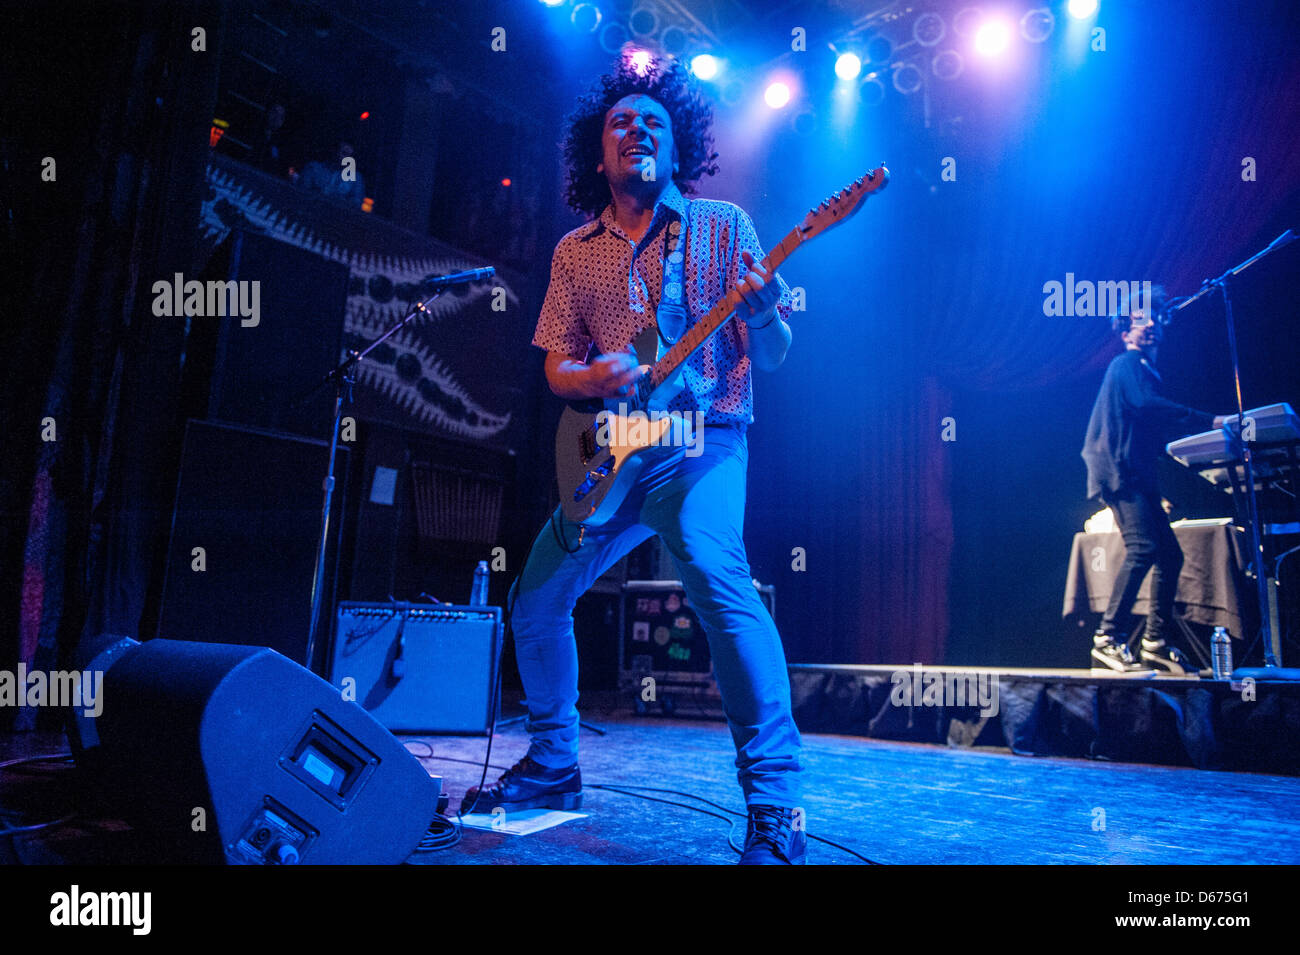 Chicago, USA. 13 April 2013. Venezuelan band Los Amigos Invisibles performing at the House of Blues in Chicago, USA. Stock Photo